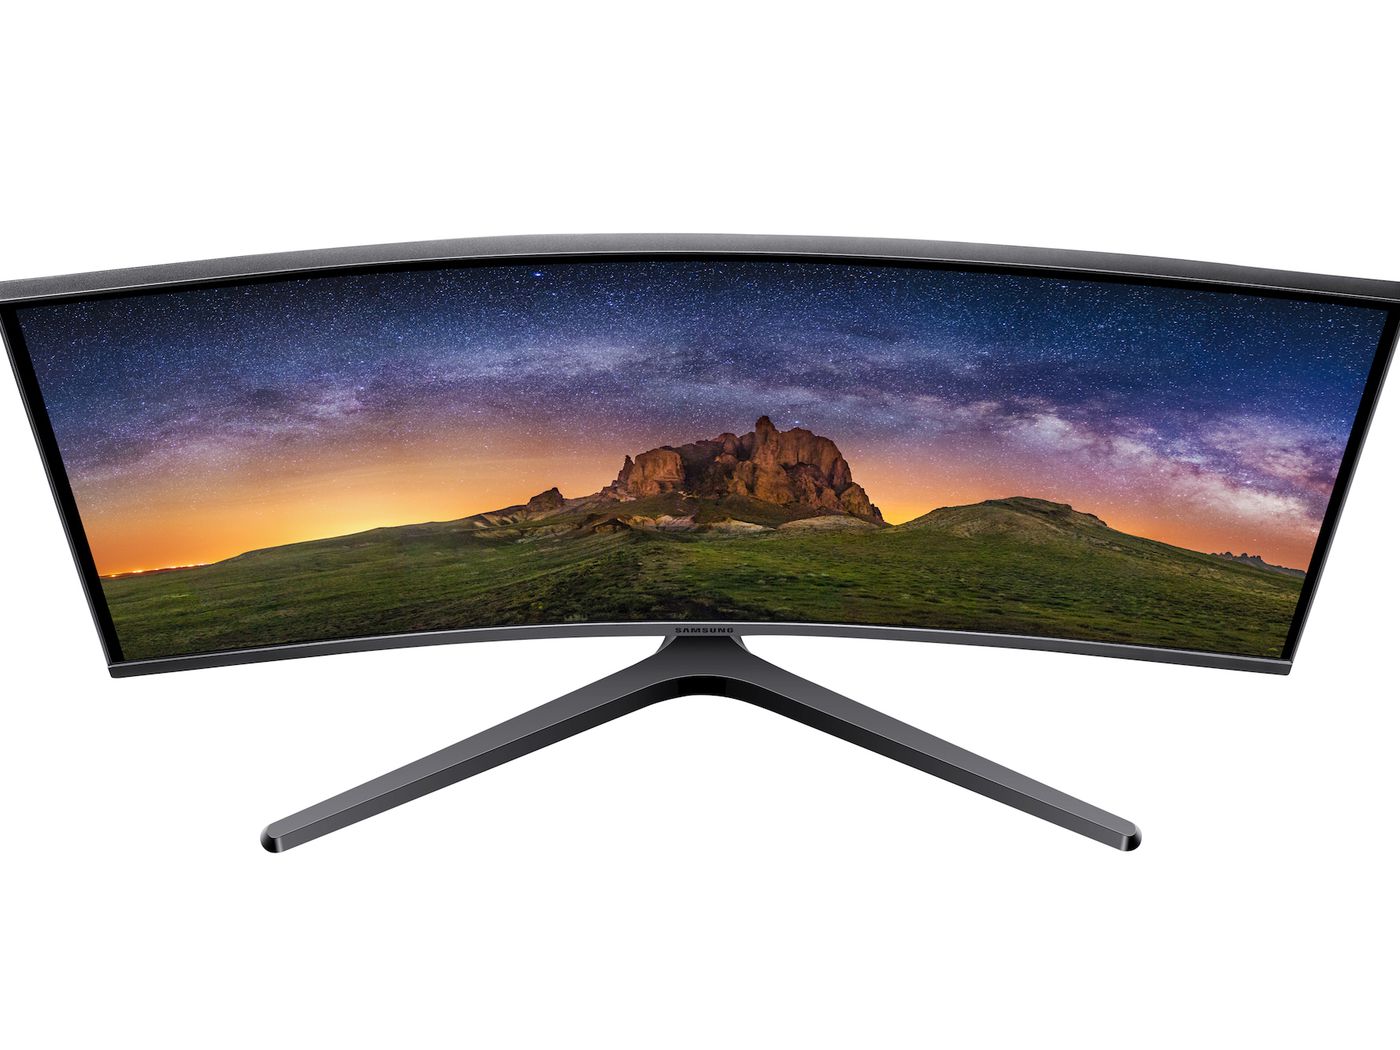 Samsung Announces Two New Affordable Curved Gaming Monitors